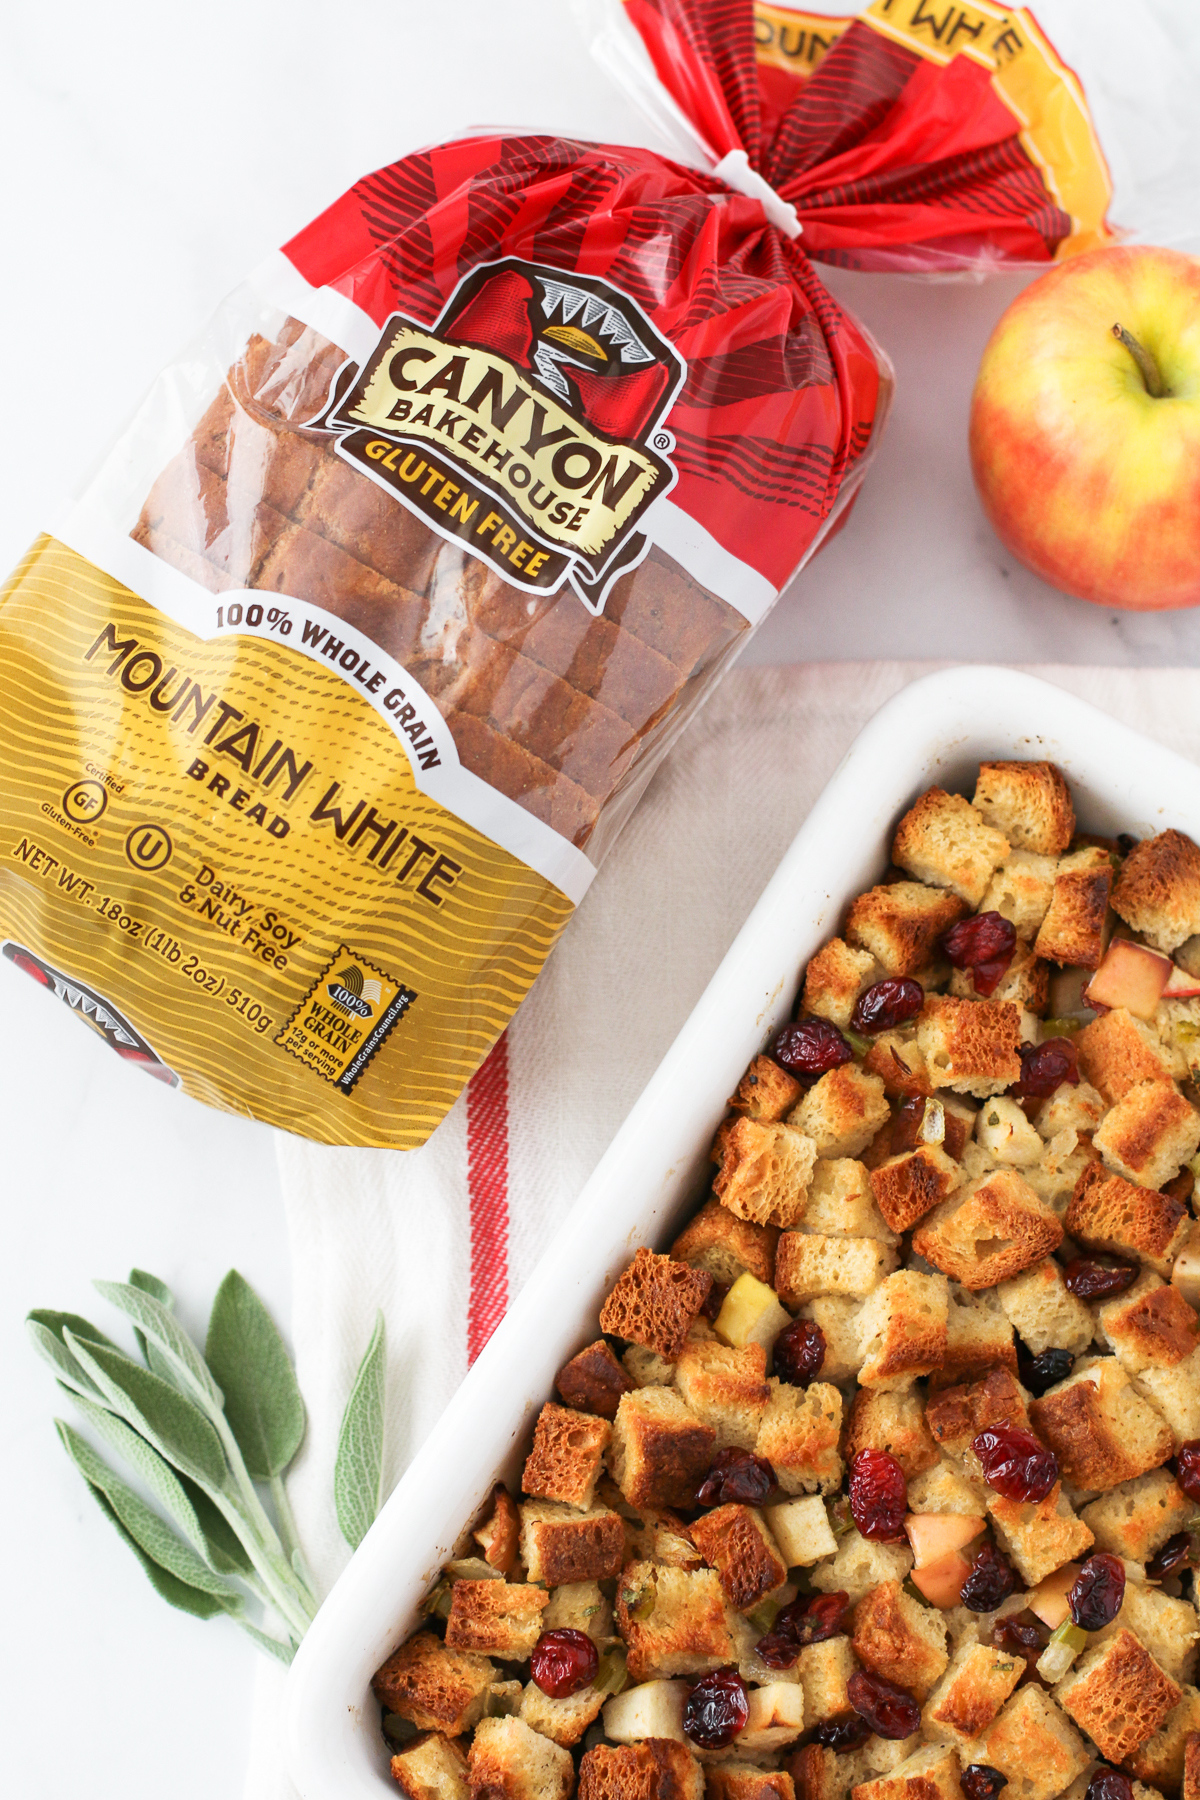 Gluten Free Apple Cranberry Stuffing. Made with Canyon Bakehouse gluten free bread, this stuffing is packed with both sweet and savory fall flavors.